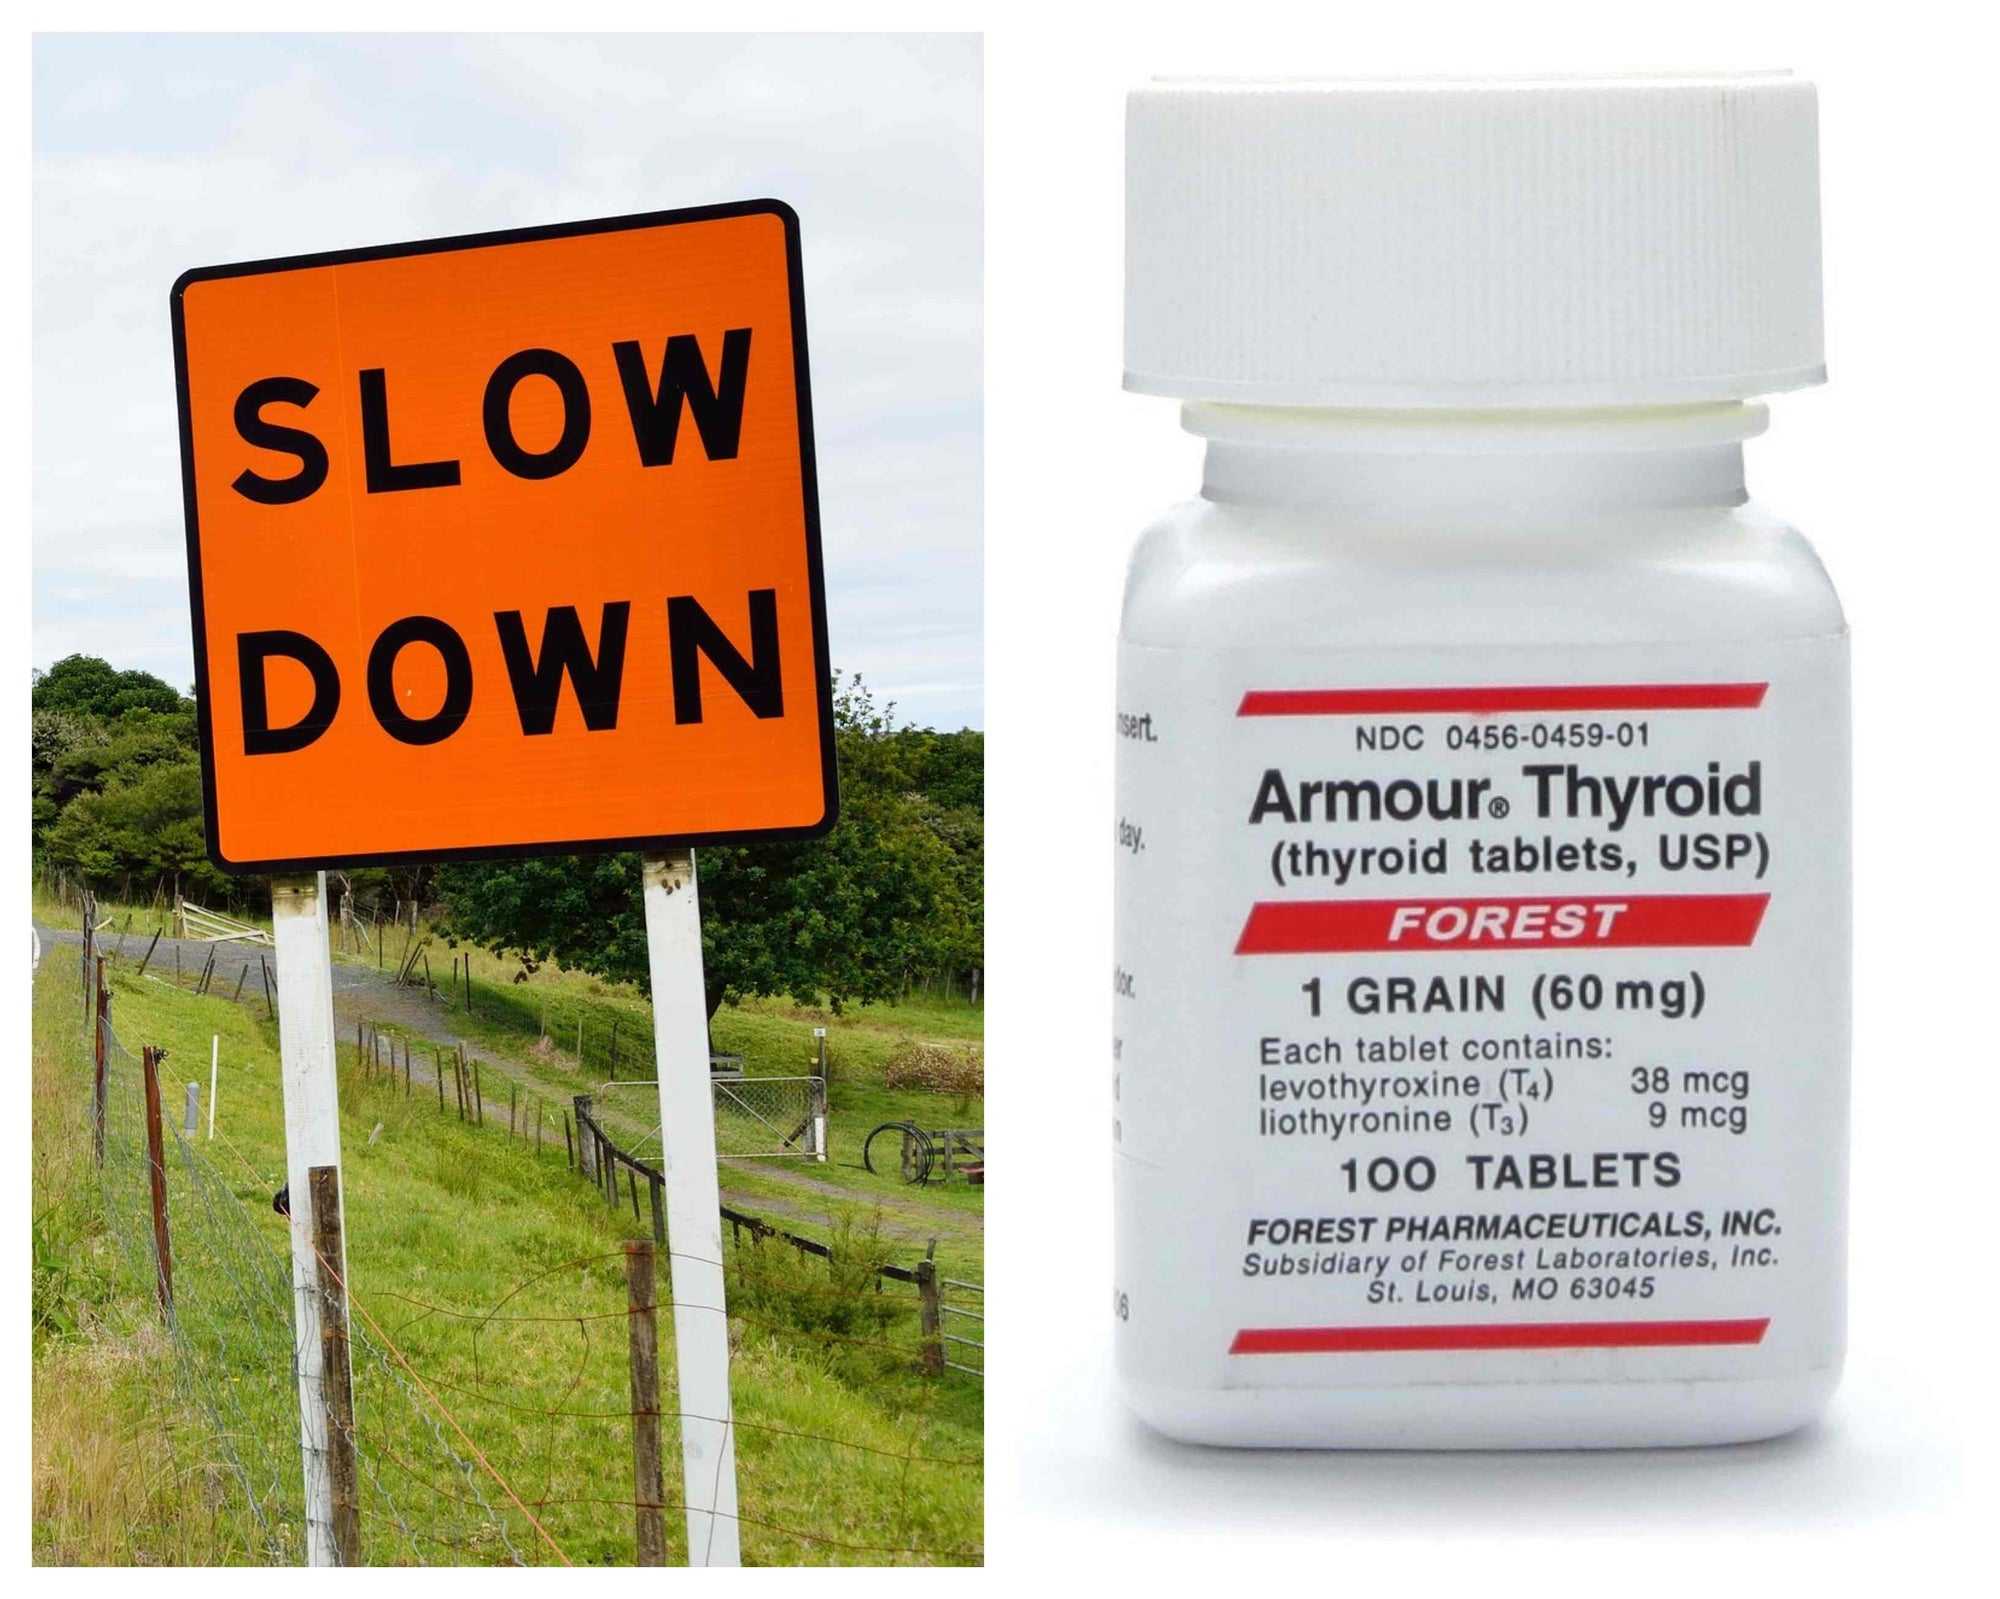 Stopping thyroid medication suddenly: Why you shouldn't do it